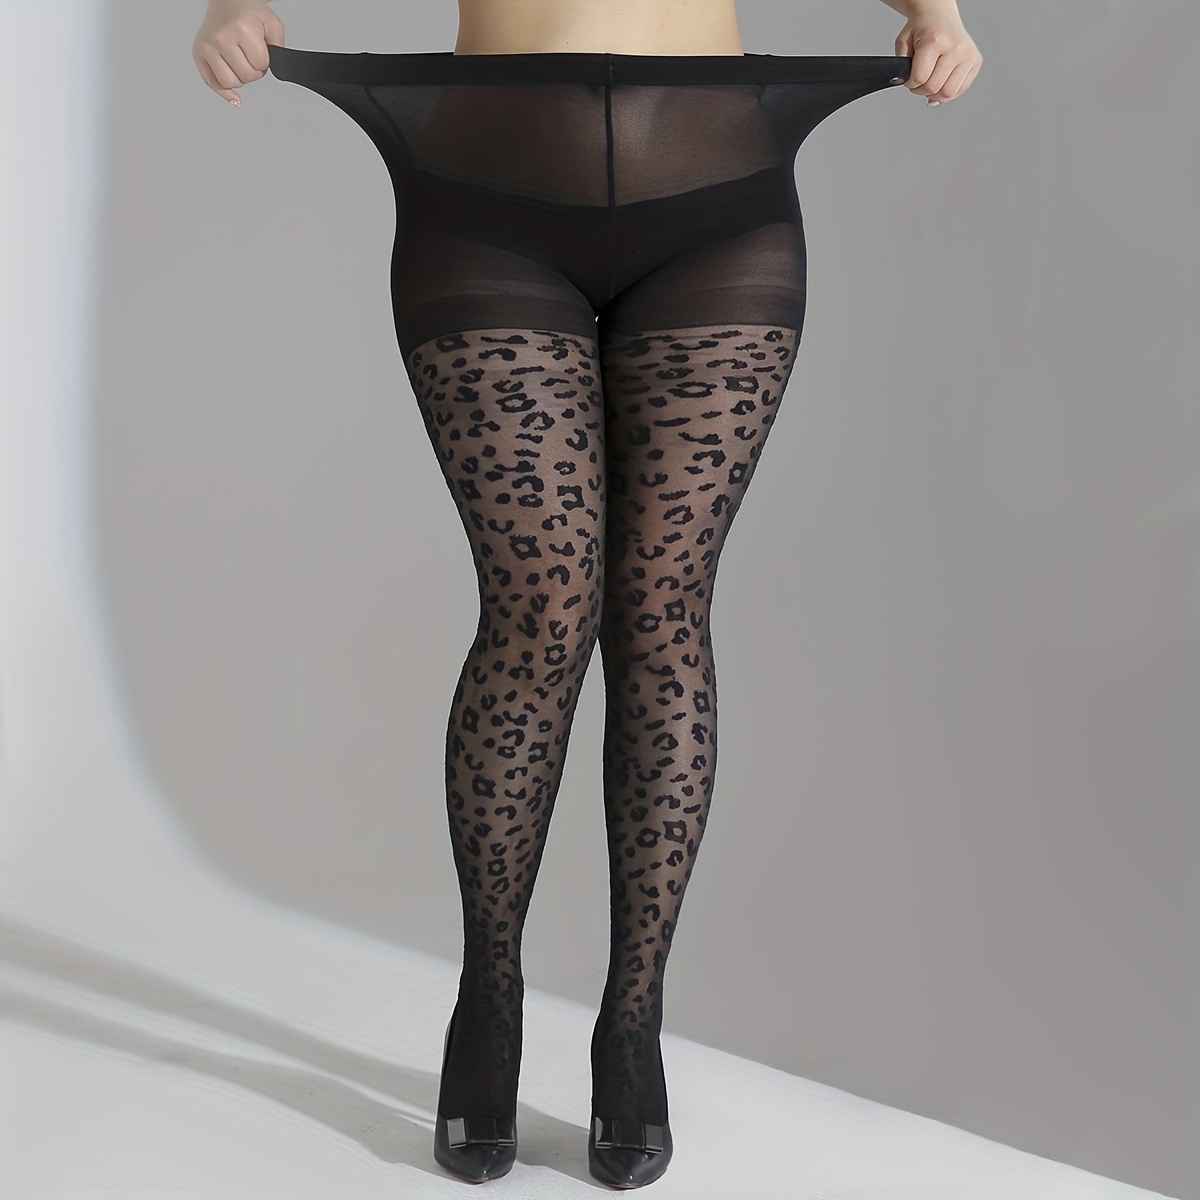 Black Leopard Sheer Tights Plus Size | Women's Fashion Tights | Patterned  Tights